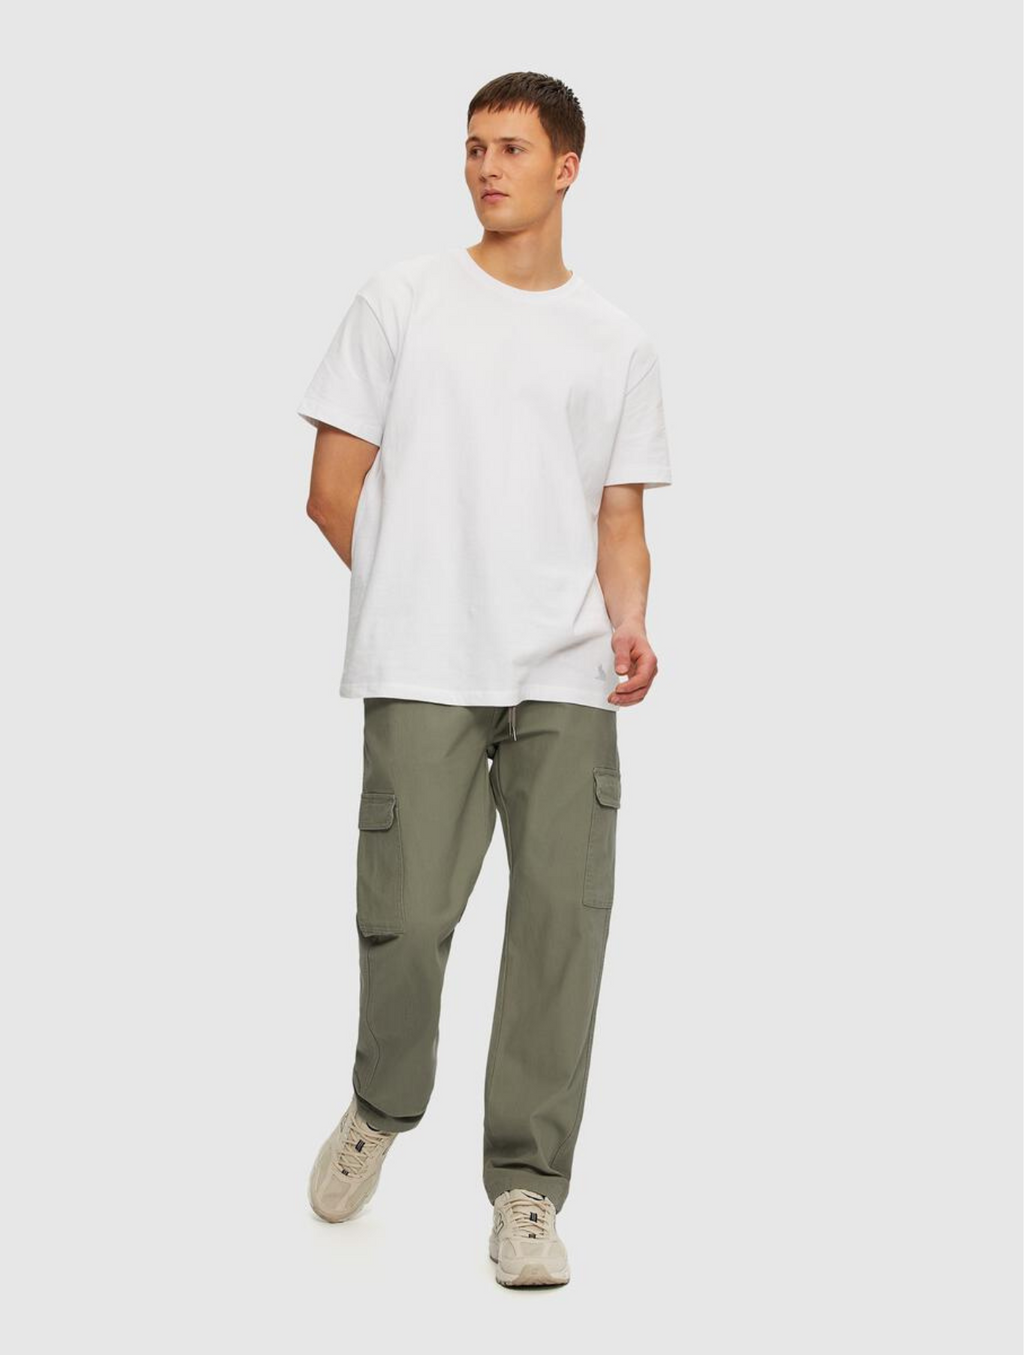 Cargo Link Pants White